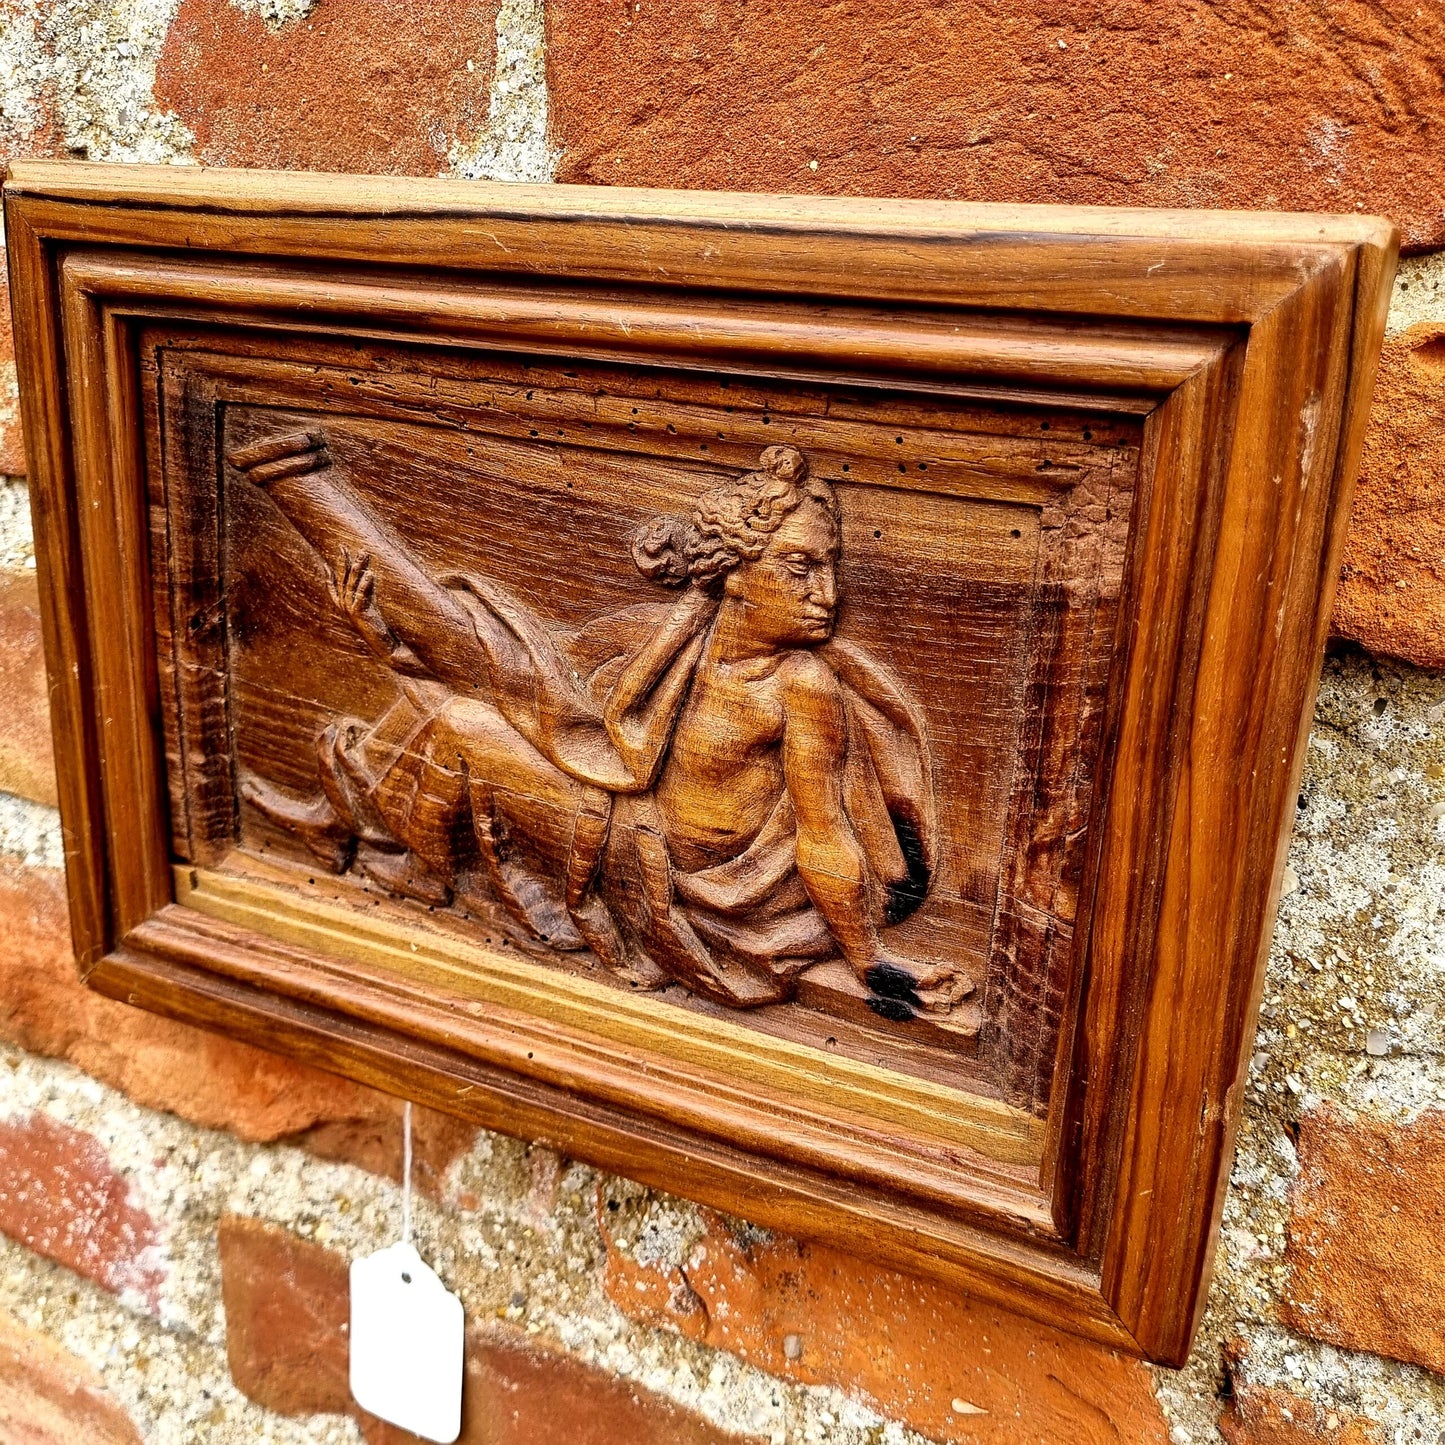 Early 18th Century Flemish Antique Carved Walnut Panel Depicting An Allegory of Fortitude